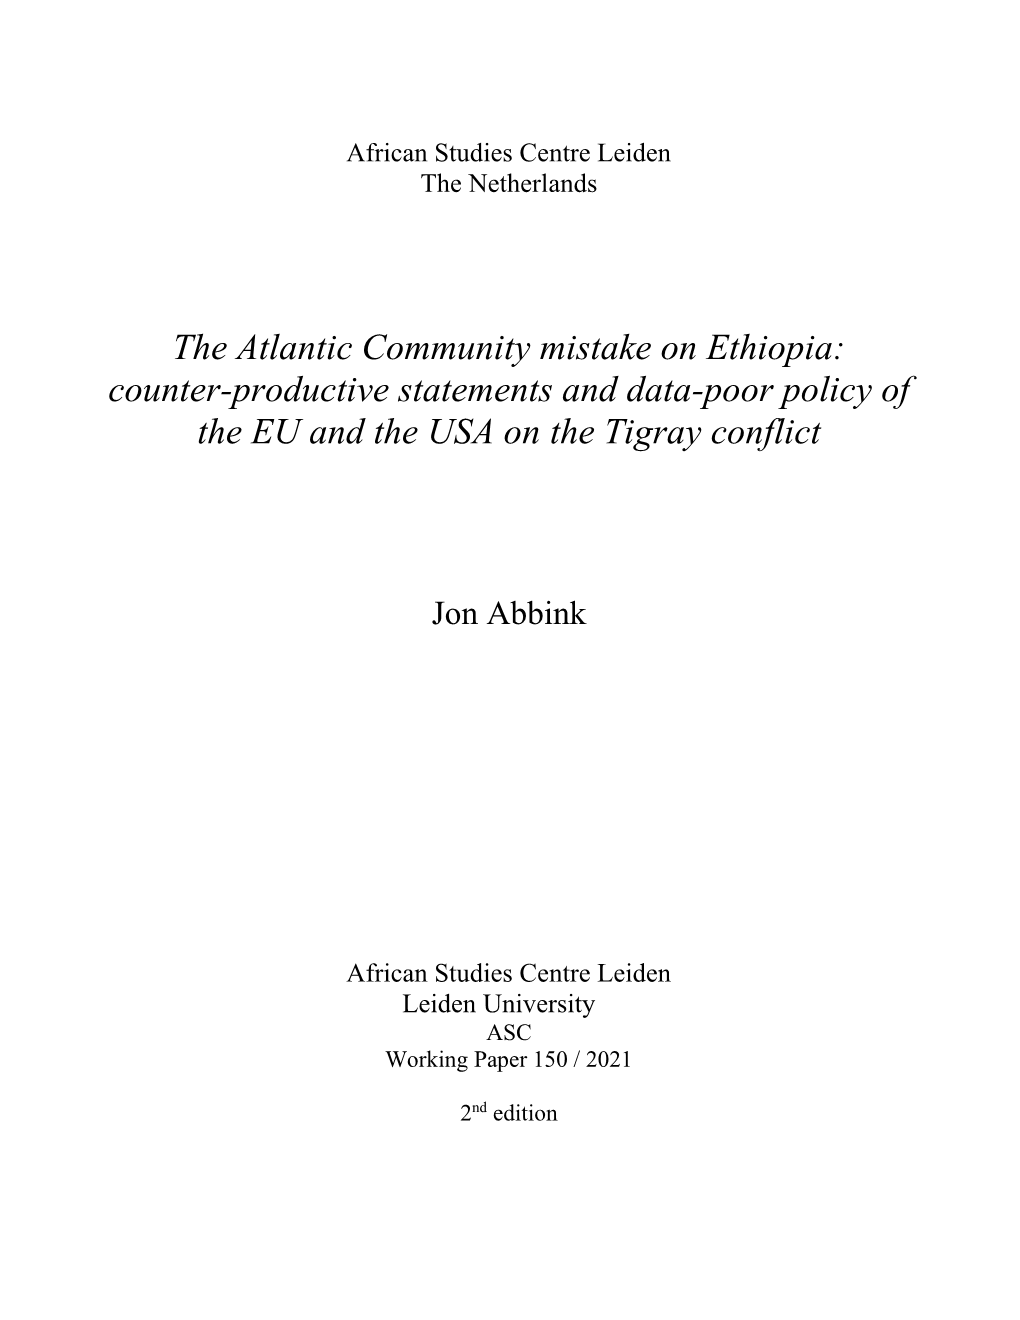 The Atlantic Community Mistake on Ethiopia: Counter-Productive Statements and Data-Poor Policy of the EU and the USA on the Tigray Conflict